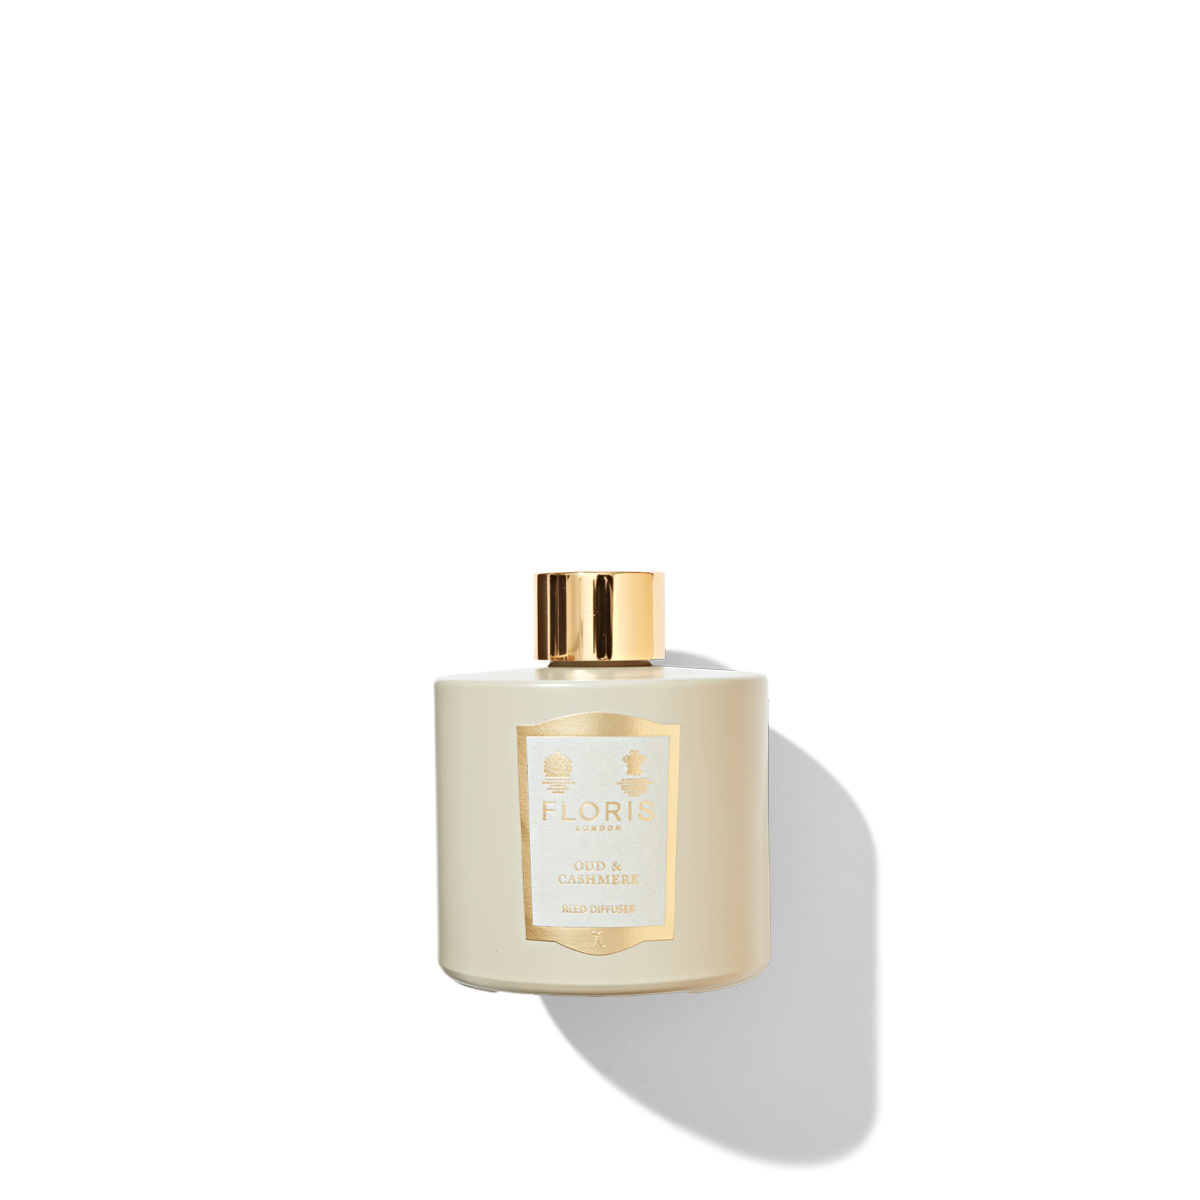 Oud & Cashmere Reed Diffuser in a beige coloured jar with a cream and gold label, and a shiny gold cap.